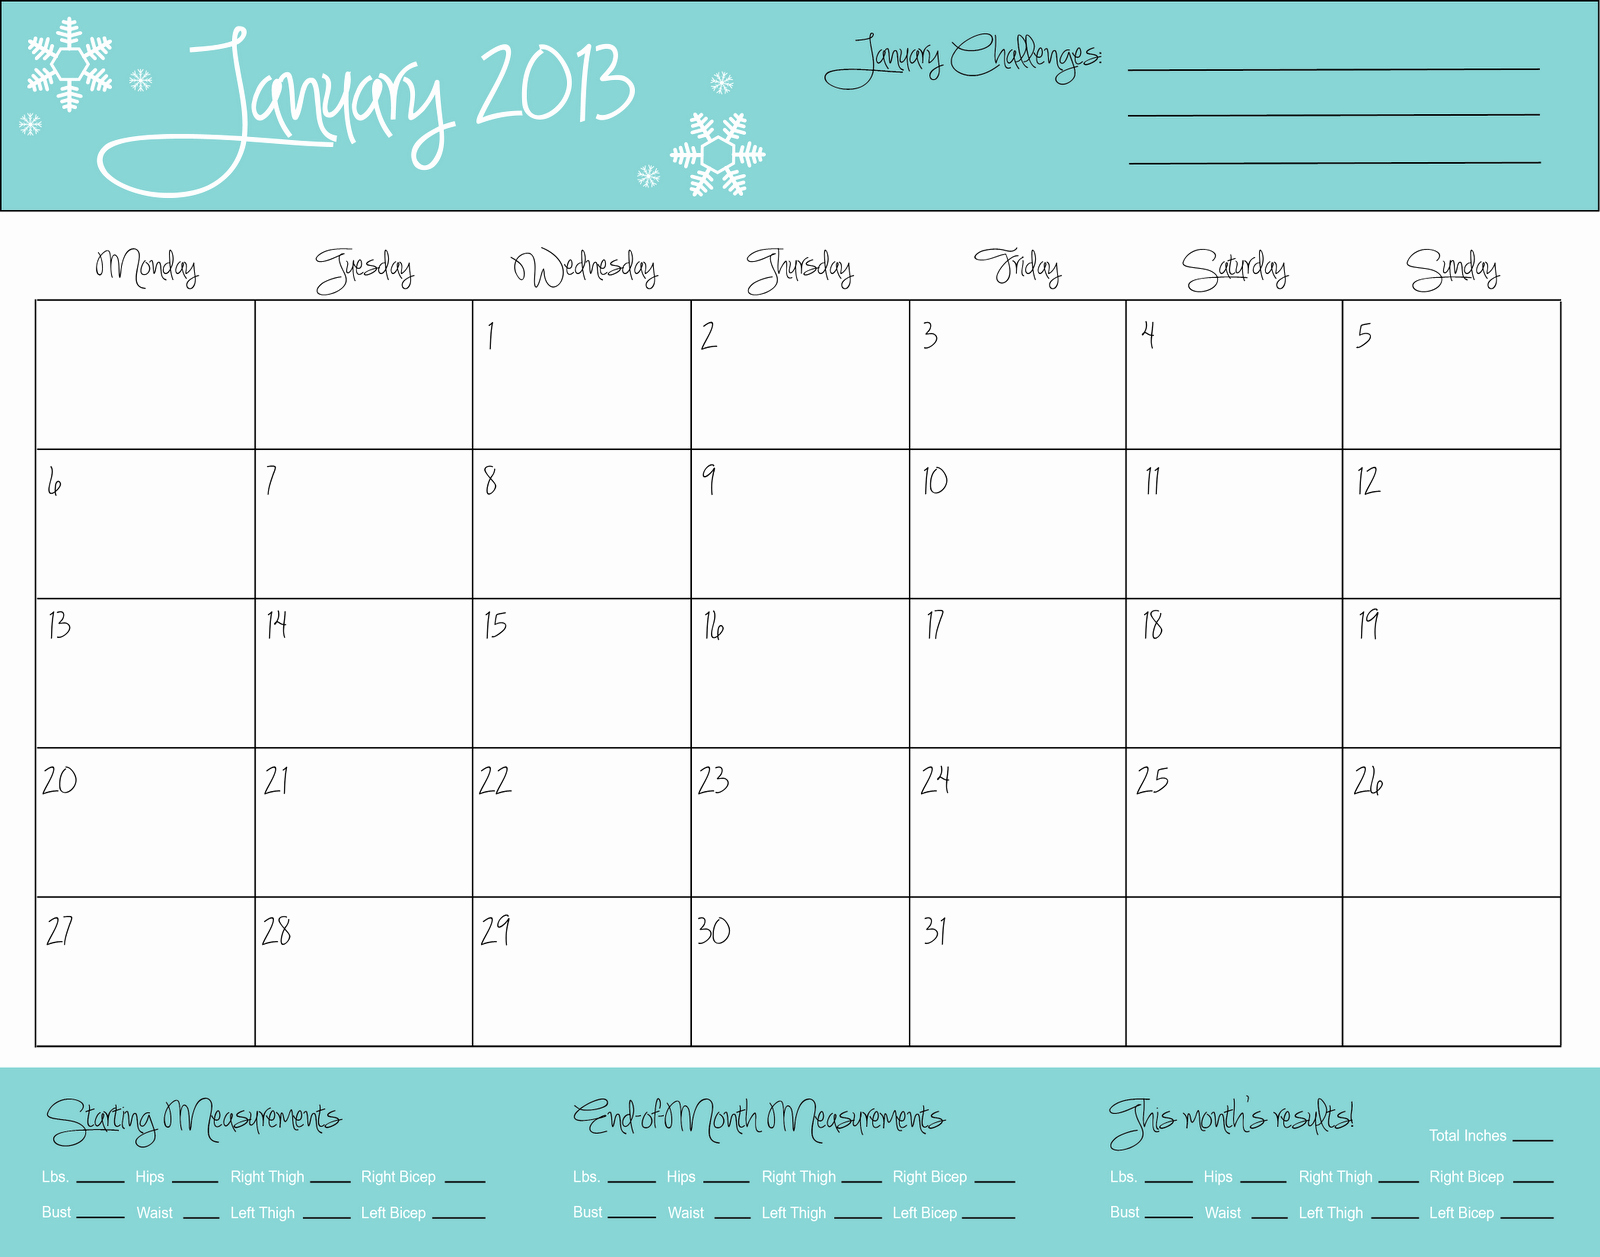 Monthly Workout Schedule Template Beautiful Monthly Exercise Calendar Template